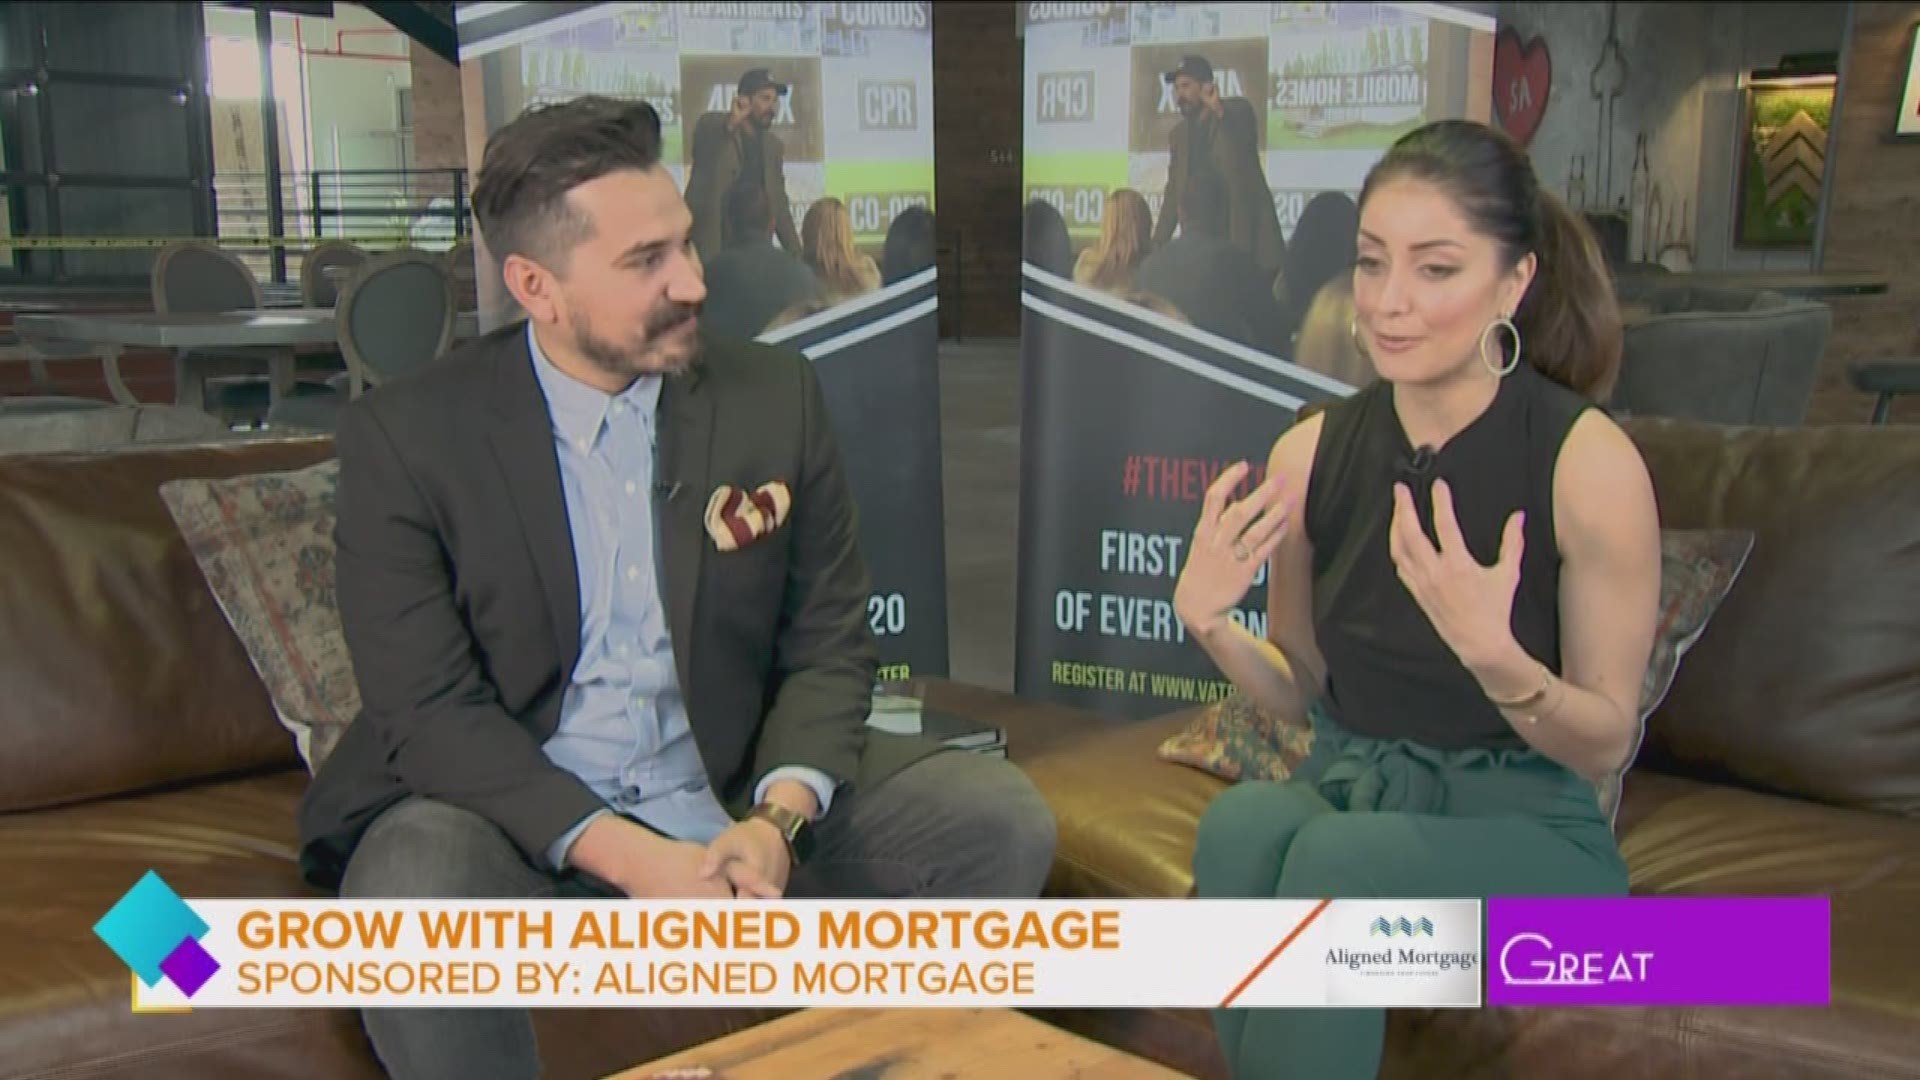 Roma talks about how you can grow with aligned mortgage